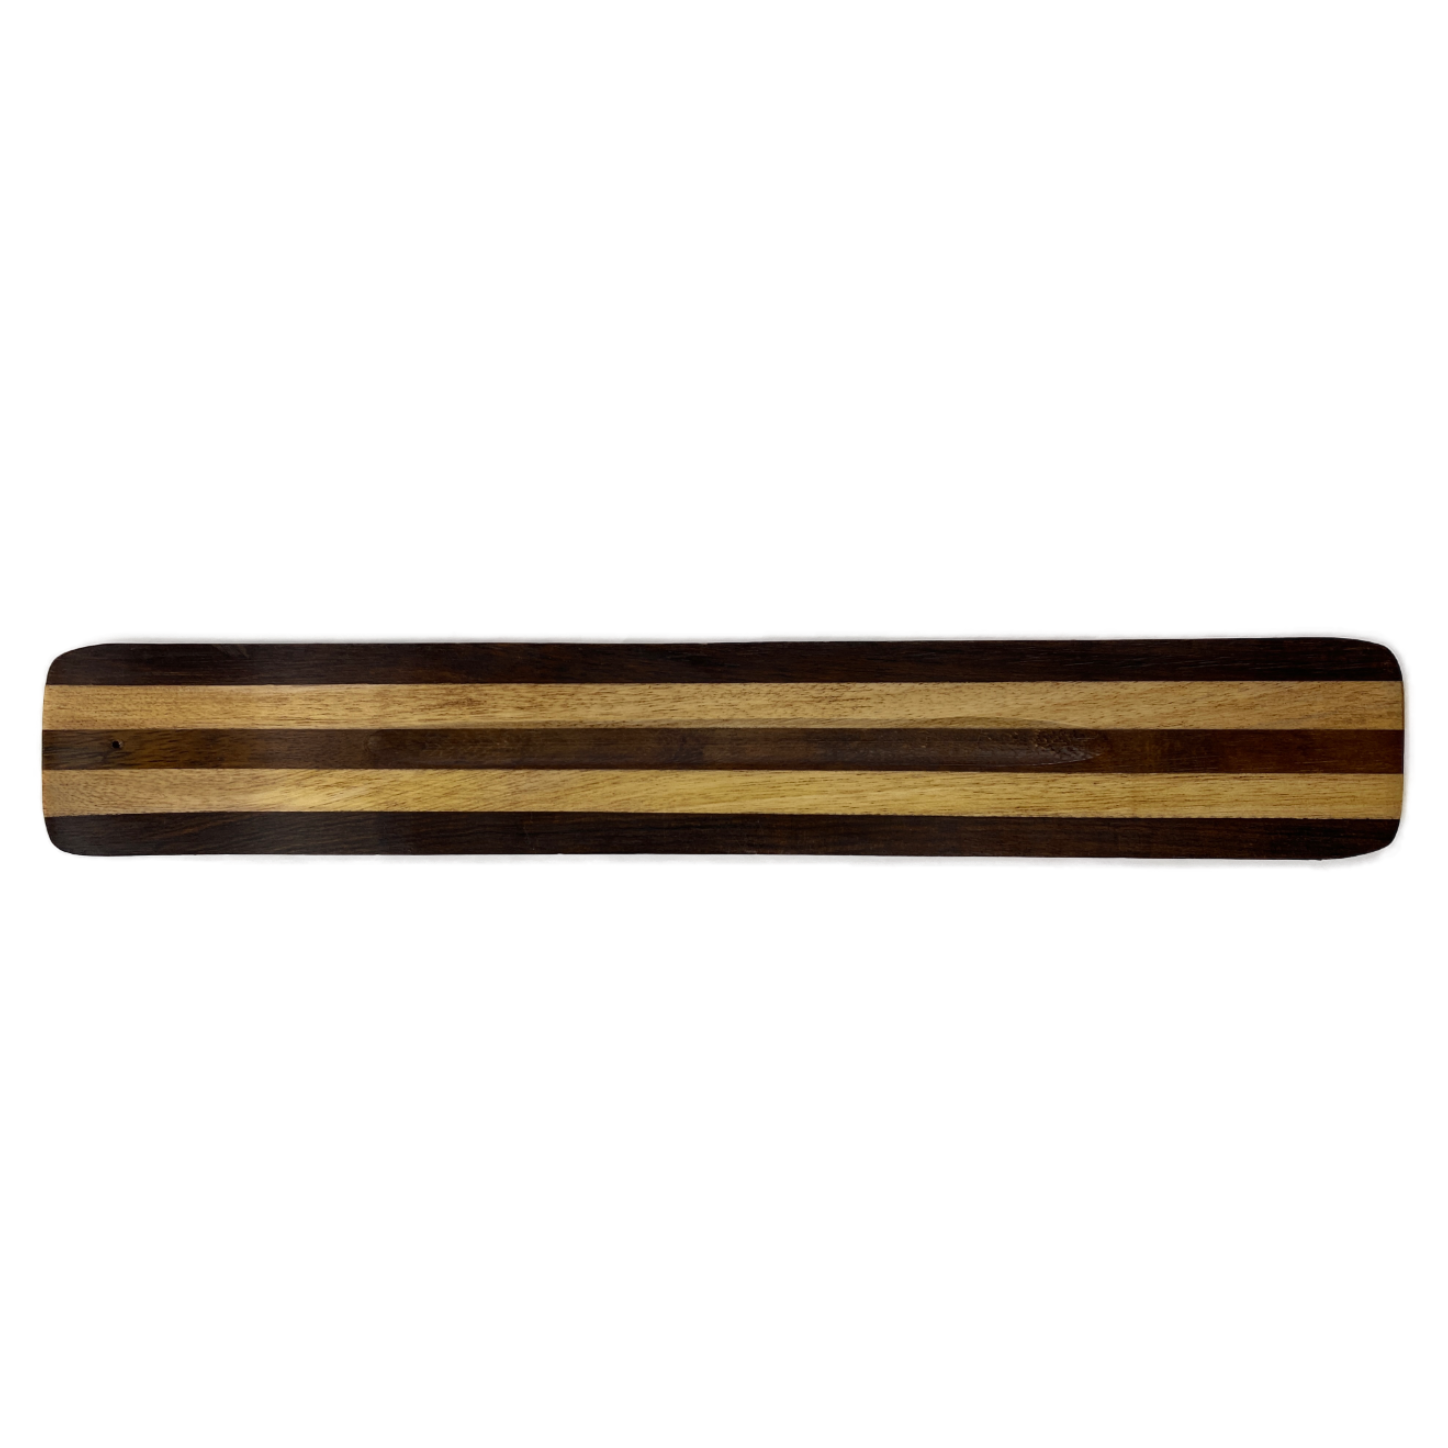 Flat wooden incense burner in 2 Dif colors light and dark wood with a raised end for incense stick 